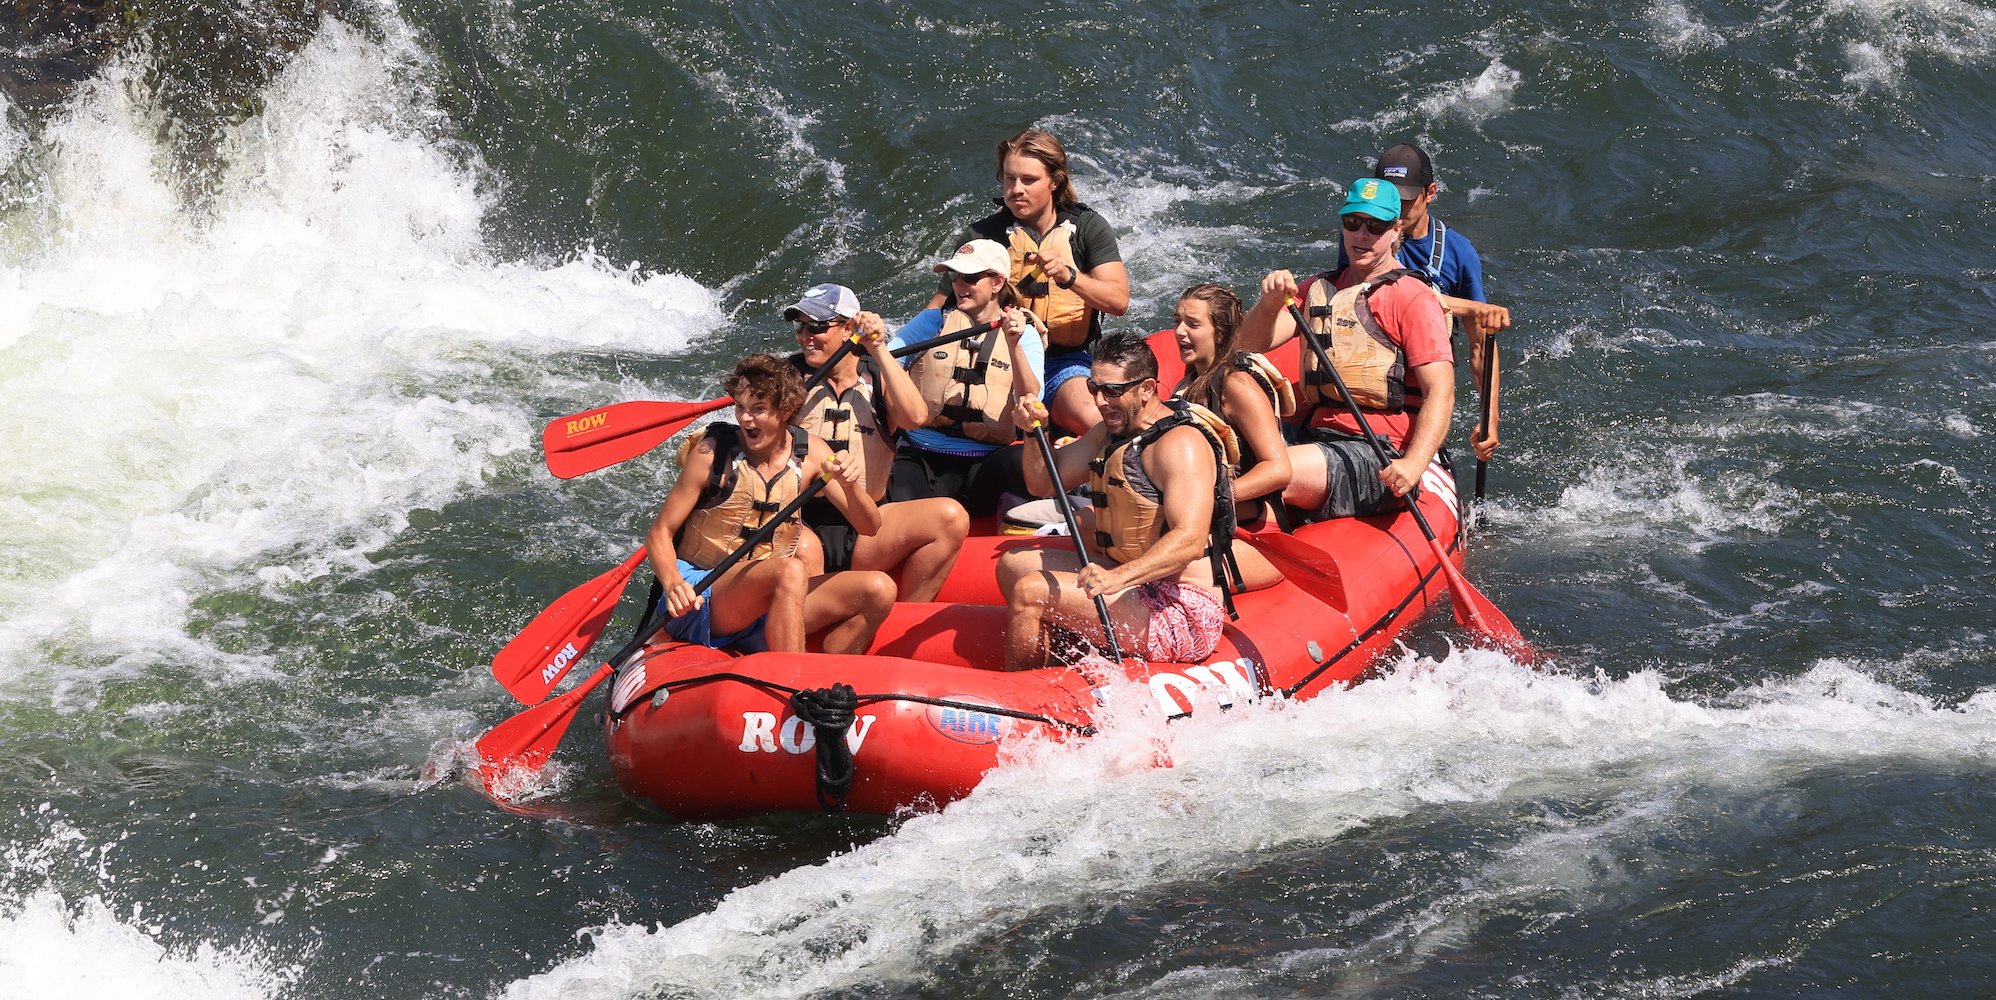 Group of whitewater rafters in a red raft paddling through a rapid on the Clark Fork river in Missoula, Montana